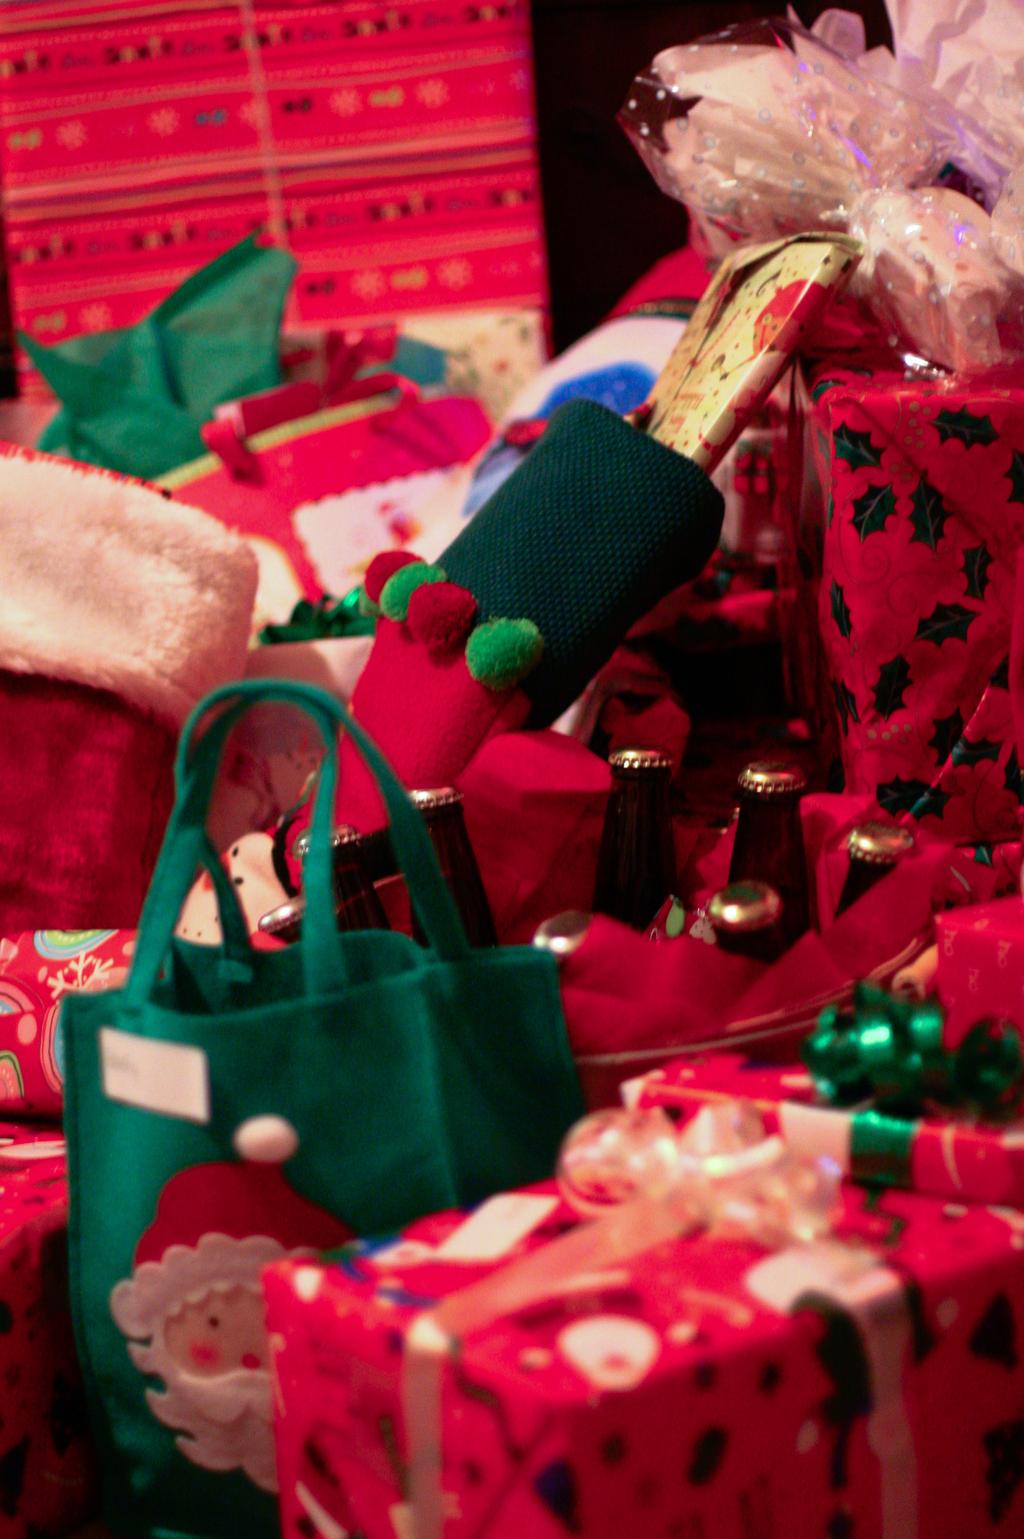 L ES S O N 4 : P res ents, Pa per a nd Ri bbon 8 INSPIRATION & IDEAS Here are a few present ideas to try: Fill the frame with presents. Shoot presents under the tree.